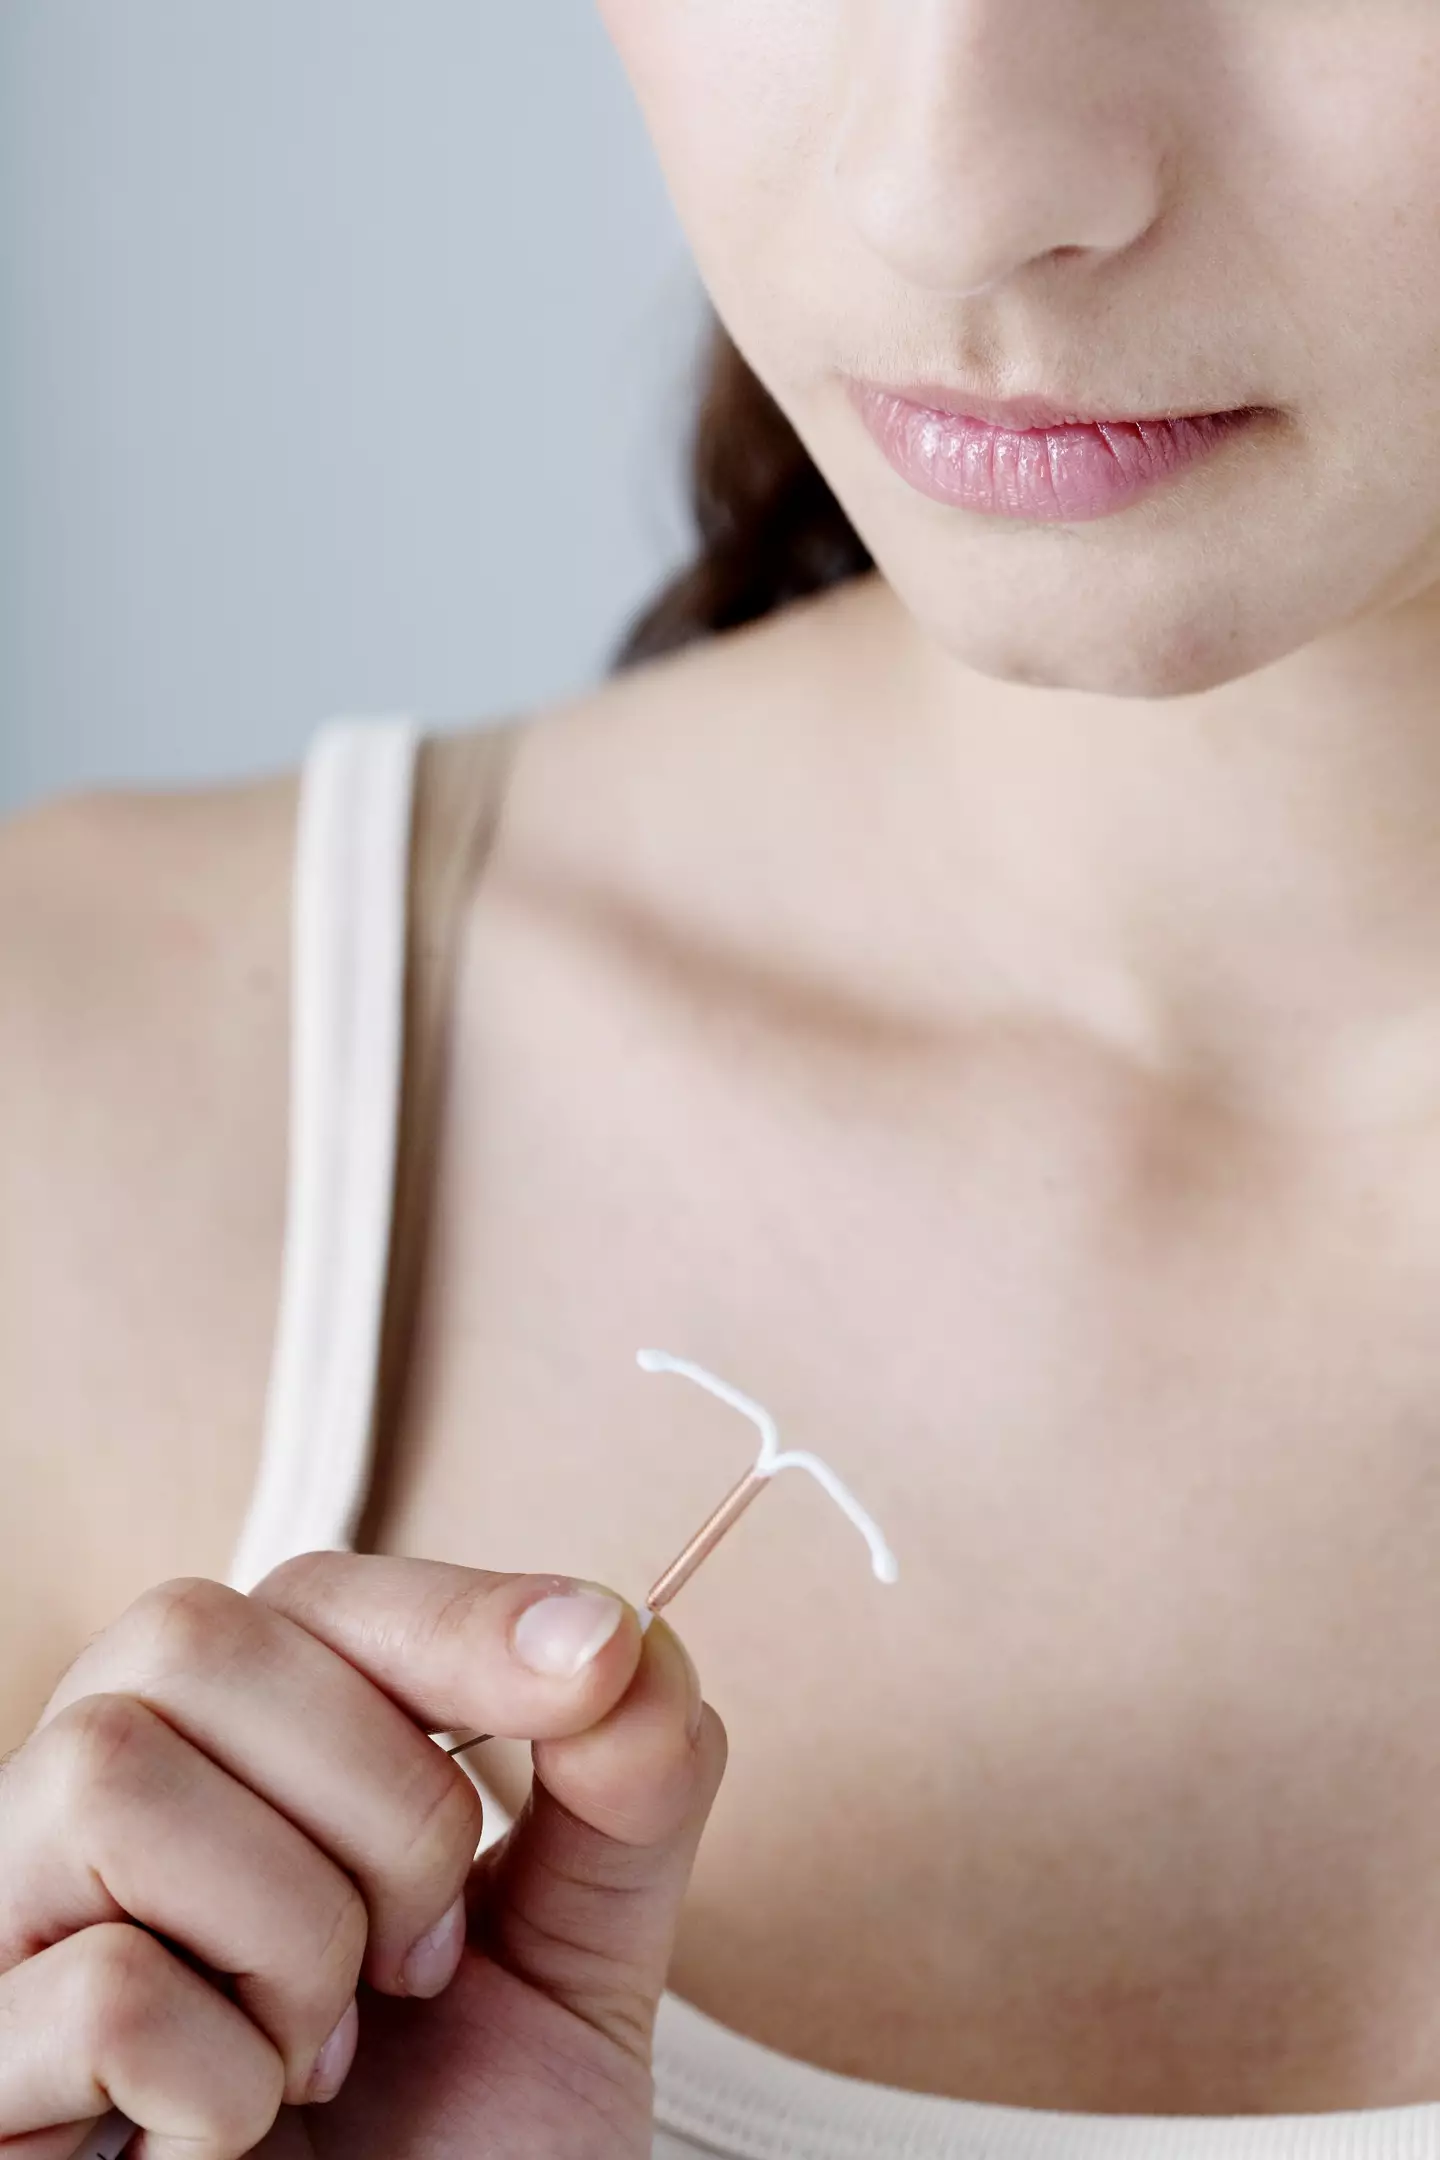 Women are sharing their own experiences of having an IUD (